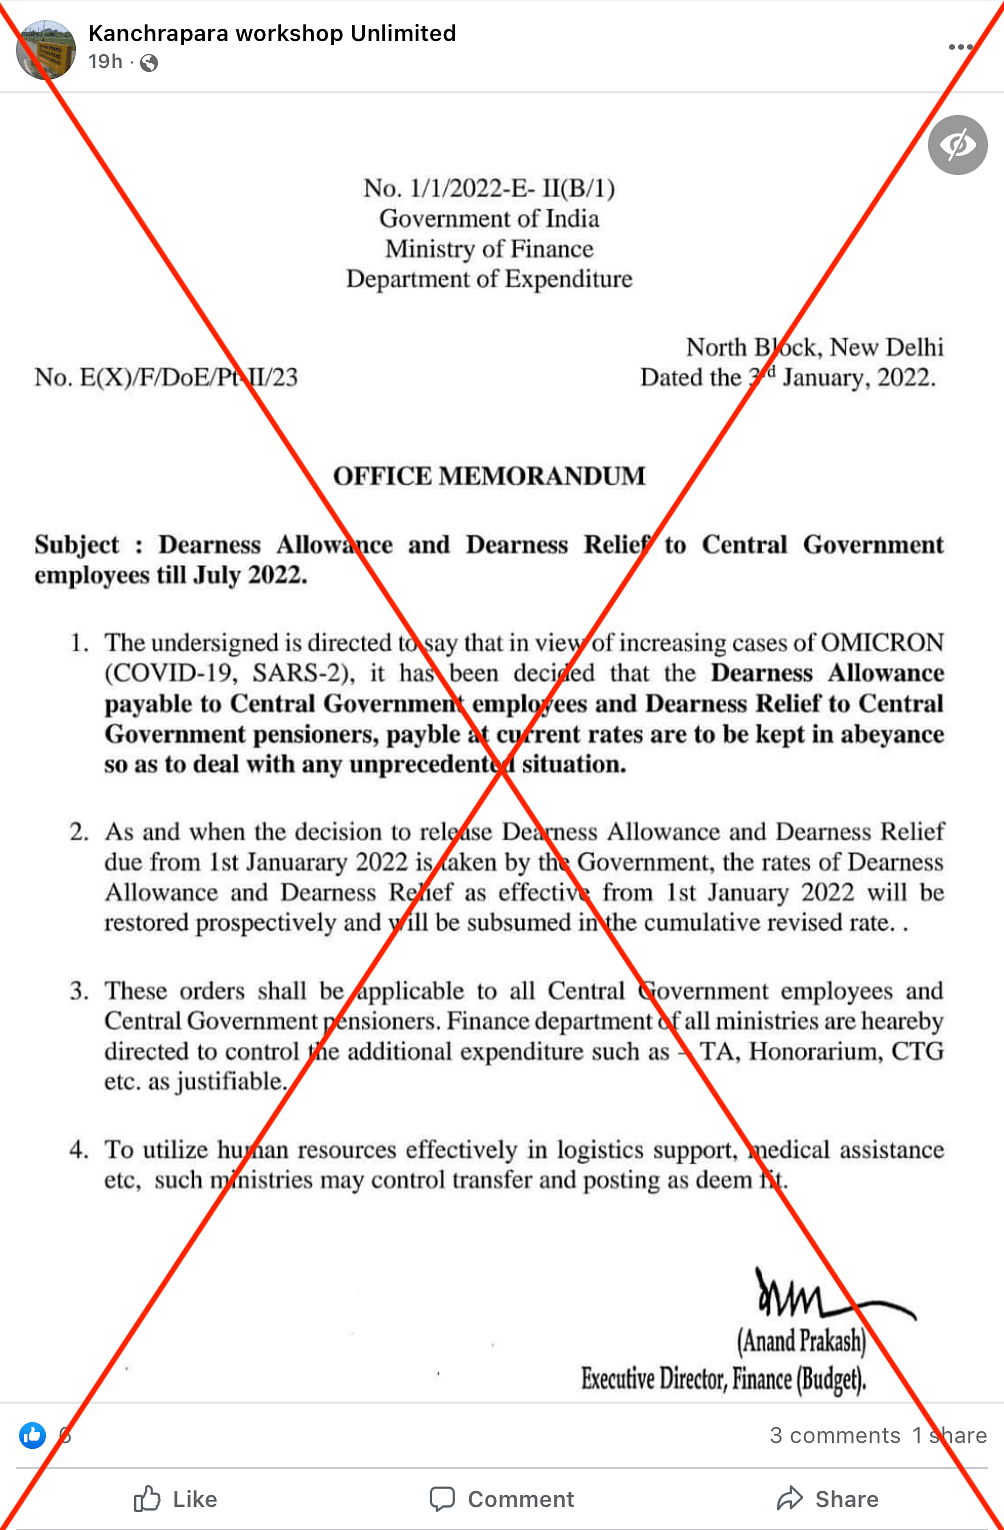 The Department of Expenditure has not issued any such memorandum regarding Dearness Allowance or Relief.